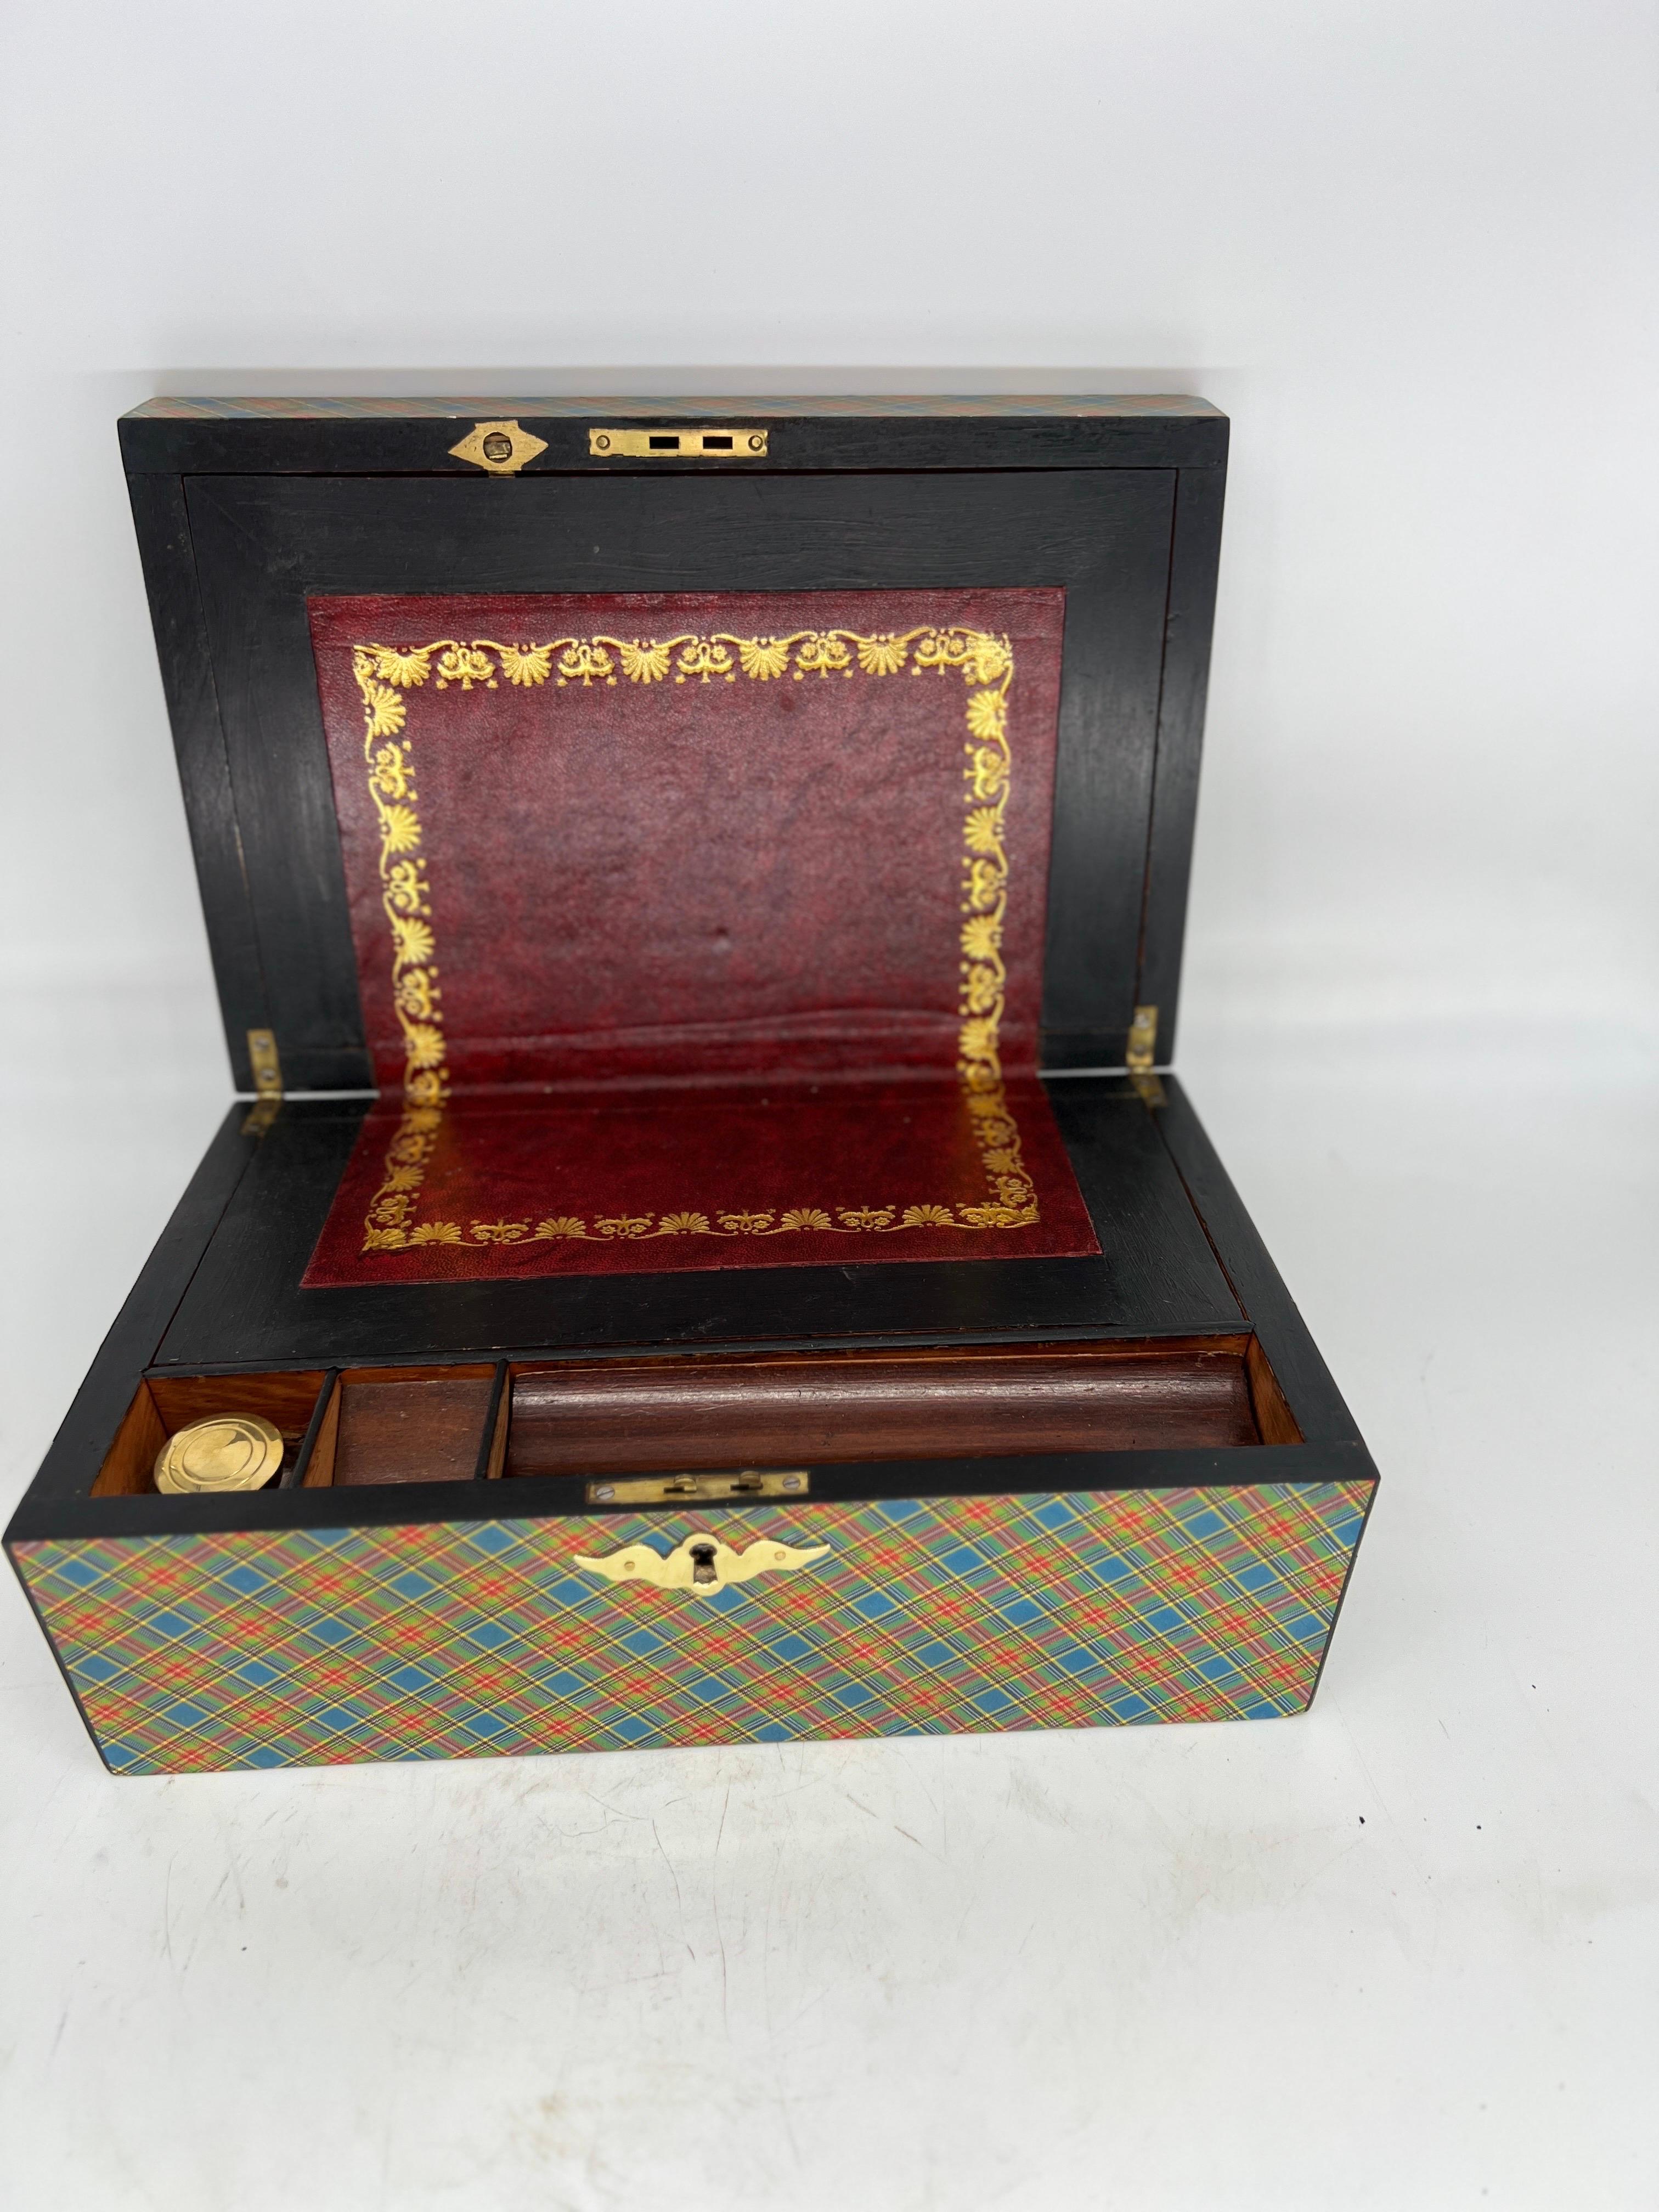 English with Scottish influence, 19th century. 

A fine quality antique 19th century lap desk constructed with a mahogany frame which has been wrapped in Scottish Tartan paper. The interior has a beautiful period embossed leather 